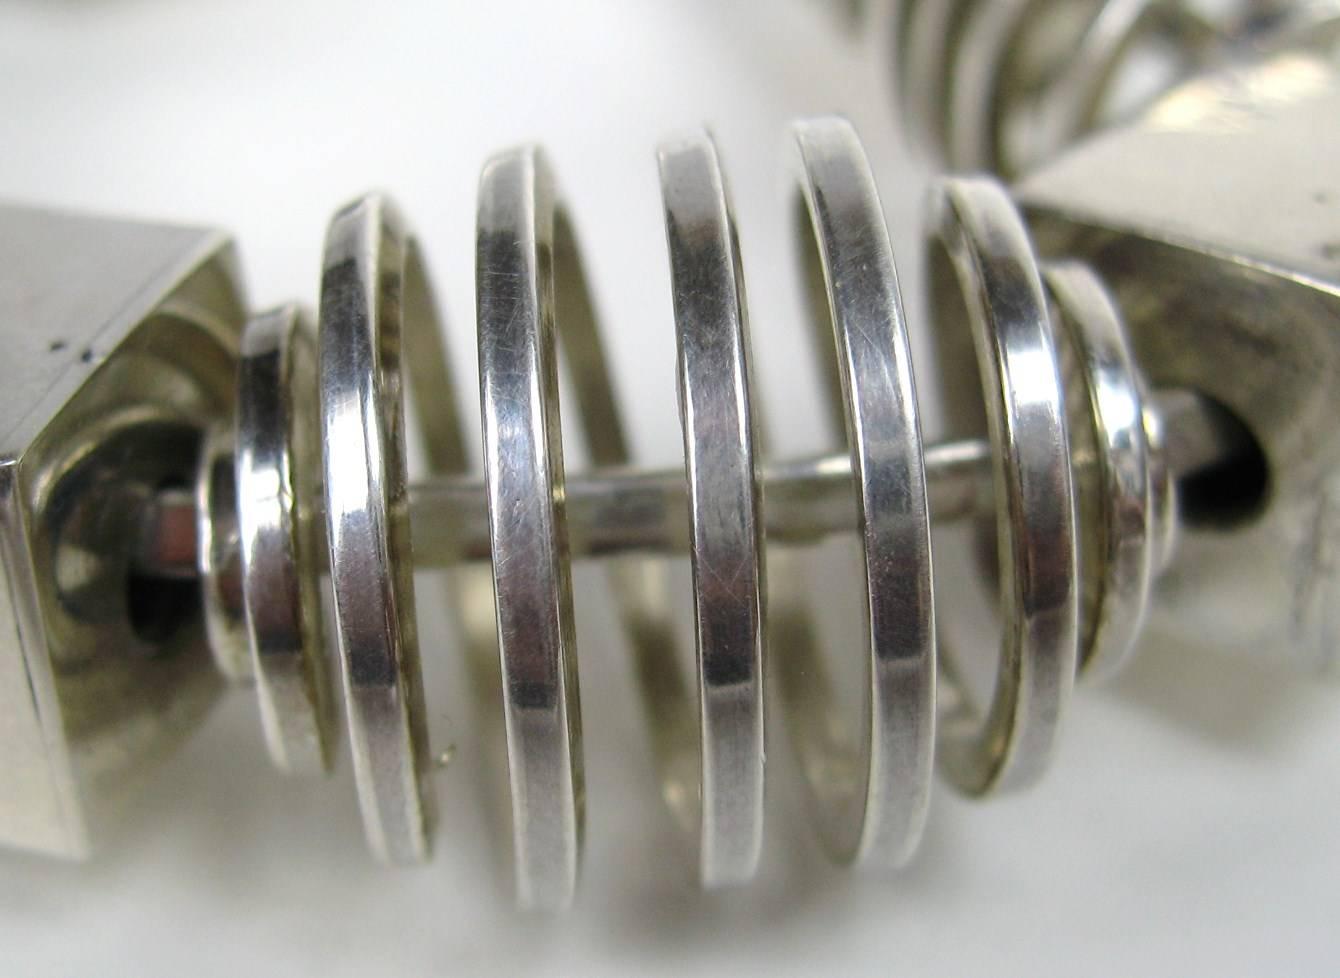 Stunning Modernist sterling Cuff Bracelet. Out of a massive collection of sterling silver. Spirals are .75 inches wide. Bracelet does adjust, Sterling silver is pliable to fit wrists 6.5 - 7.75. This is out of a massive collection of Contemporary